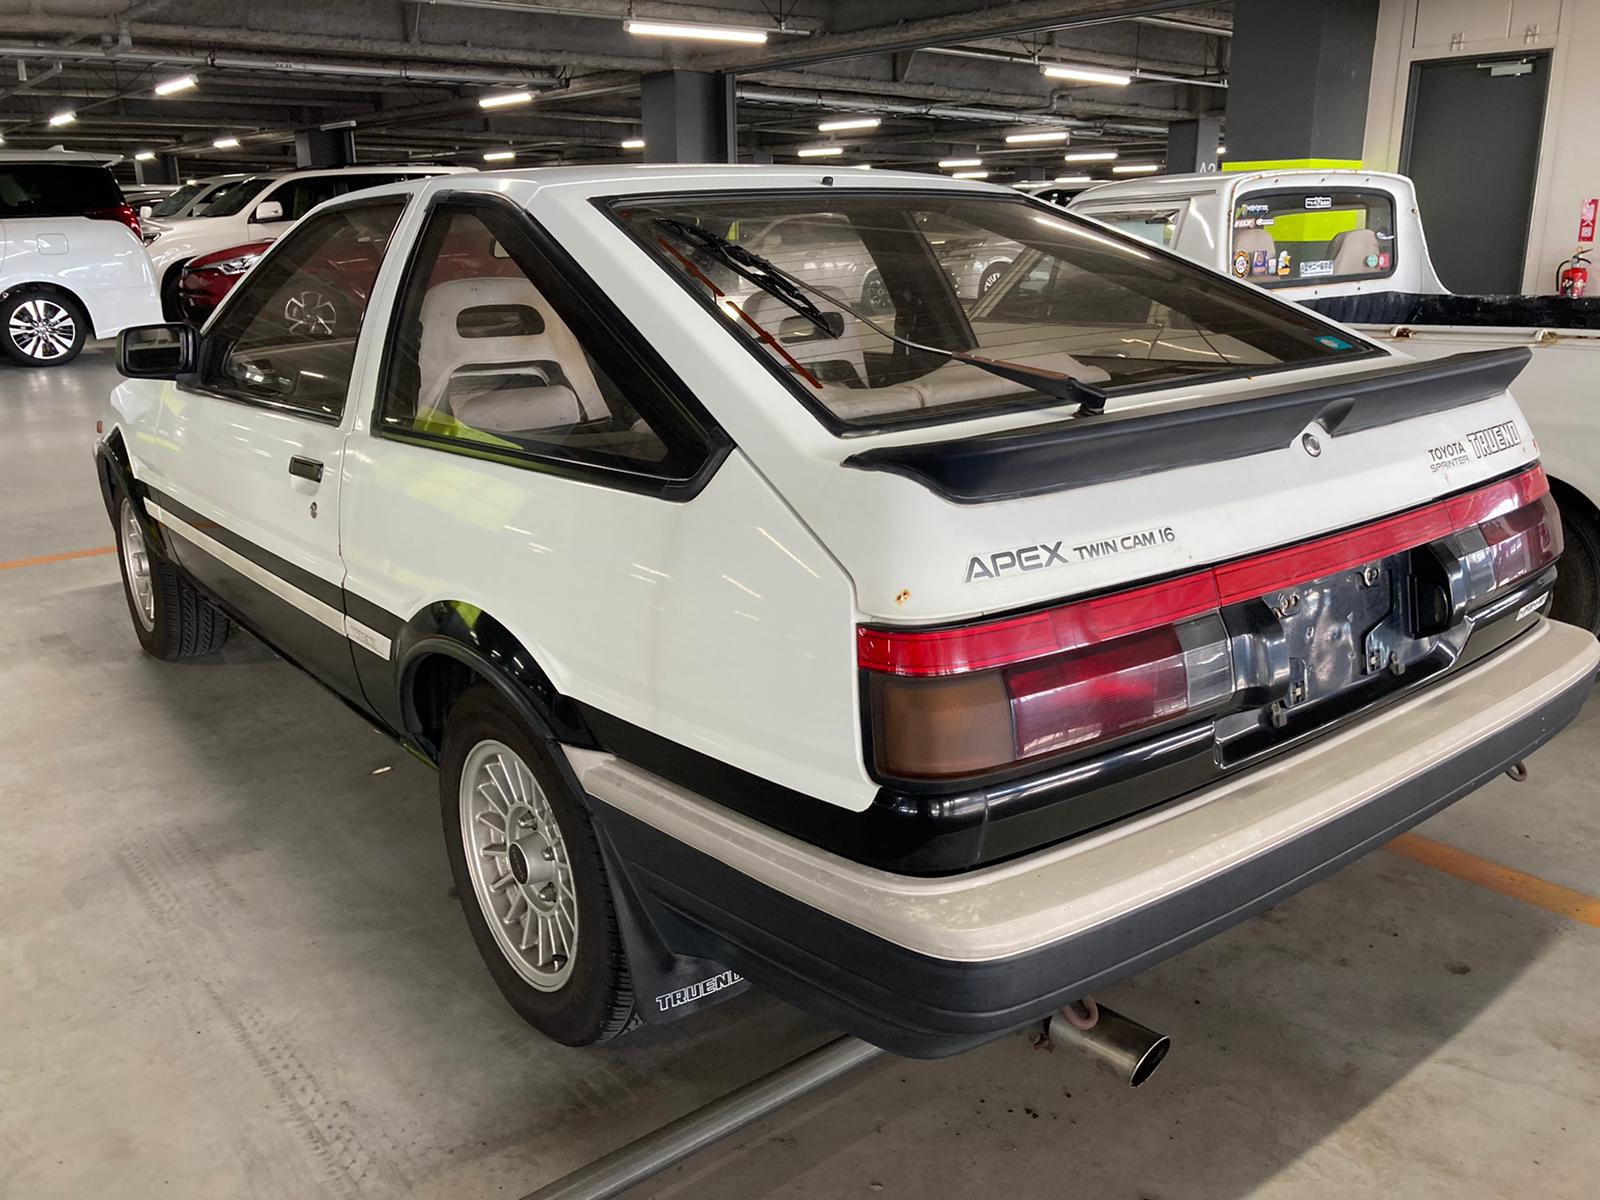 AE86 Project Inspection